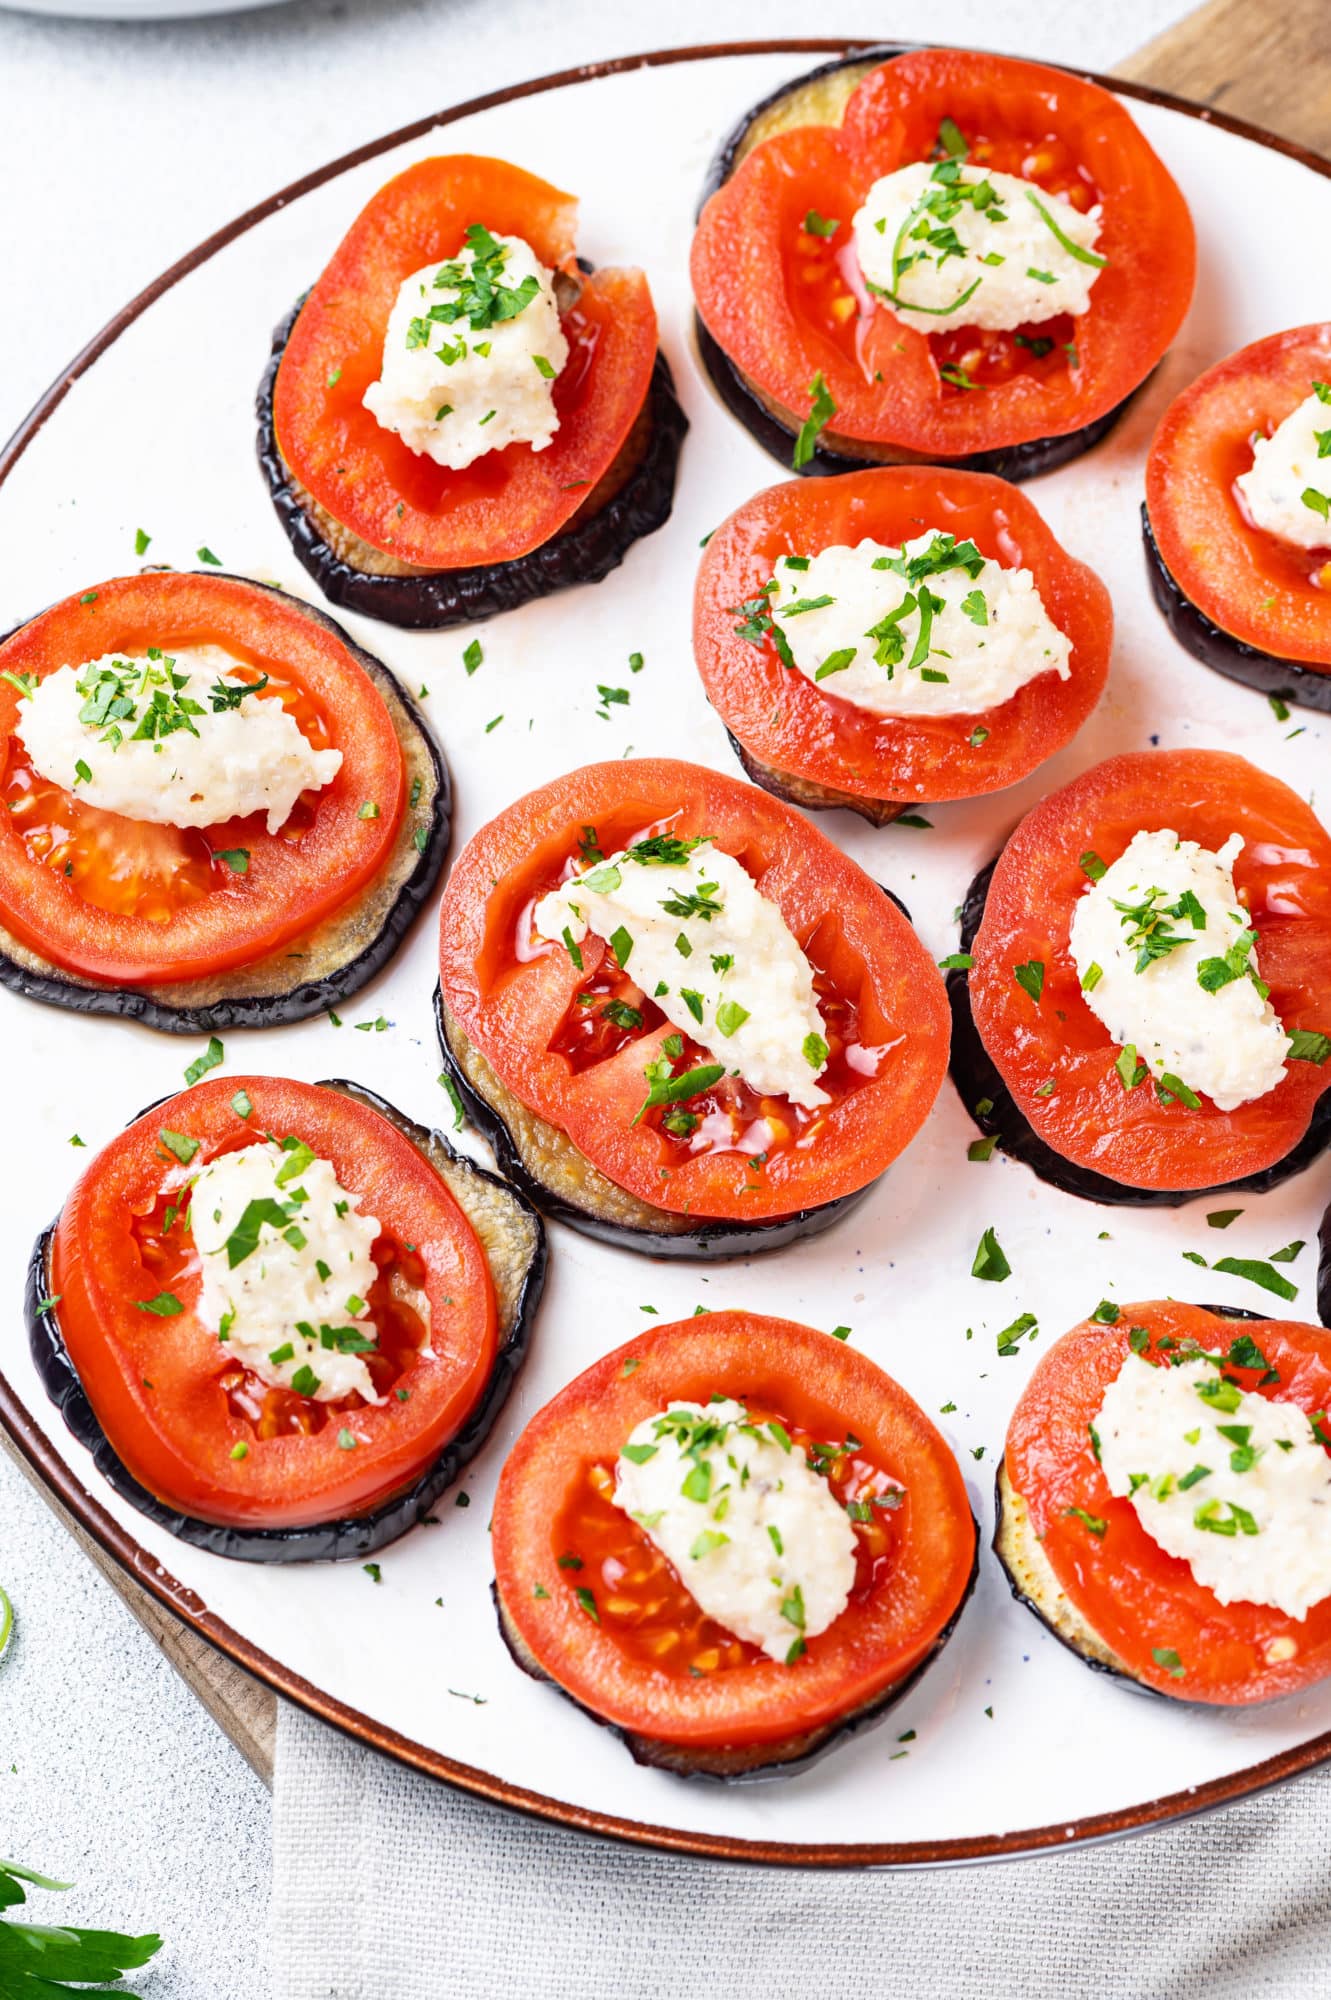 eggplant slices under tomato slices with a creamy topping on a white plate making up small individual appetizers.